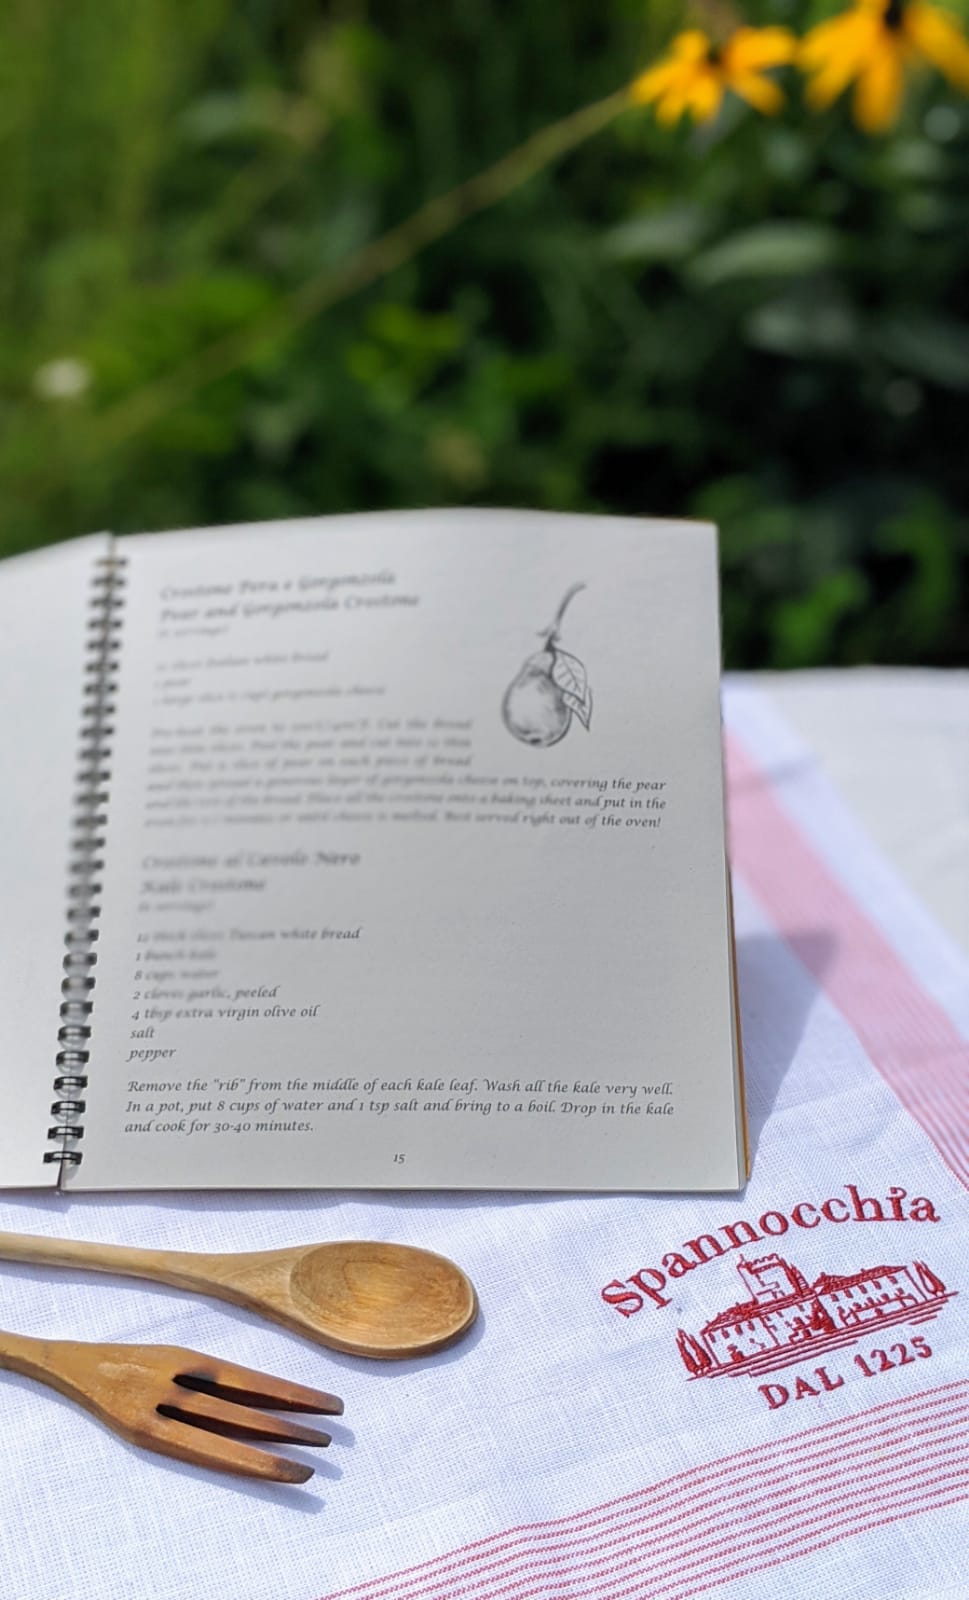 Open book showing a blurred recipe, with Spannochia linen towel and wooden utensils